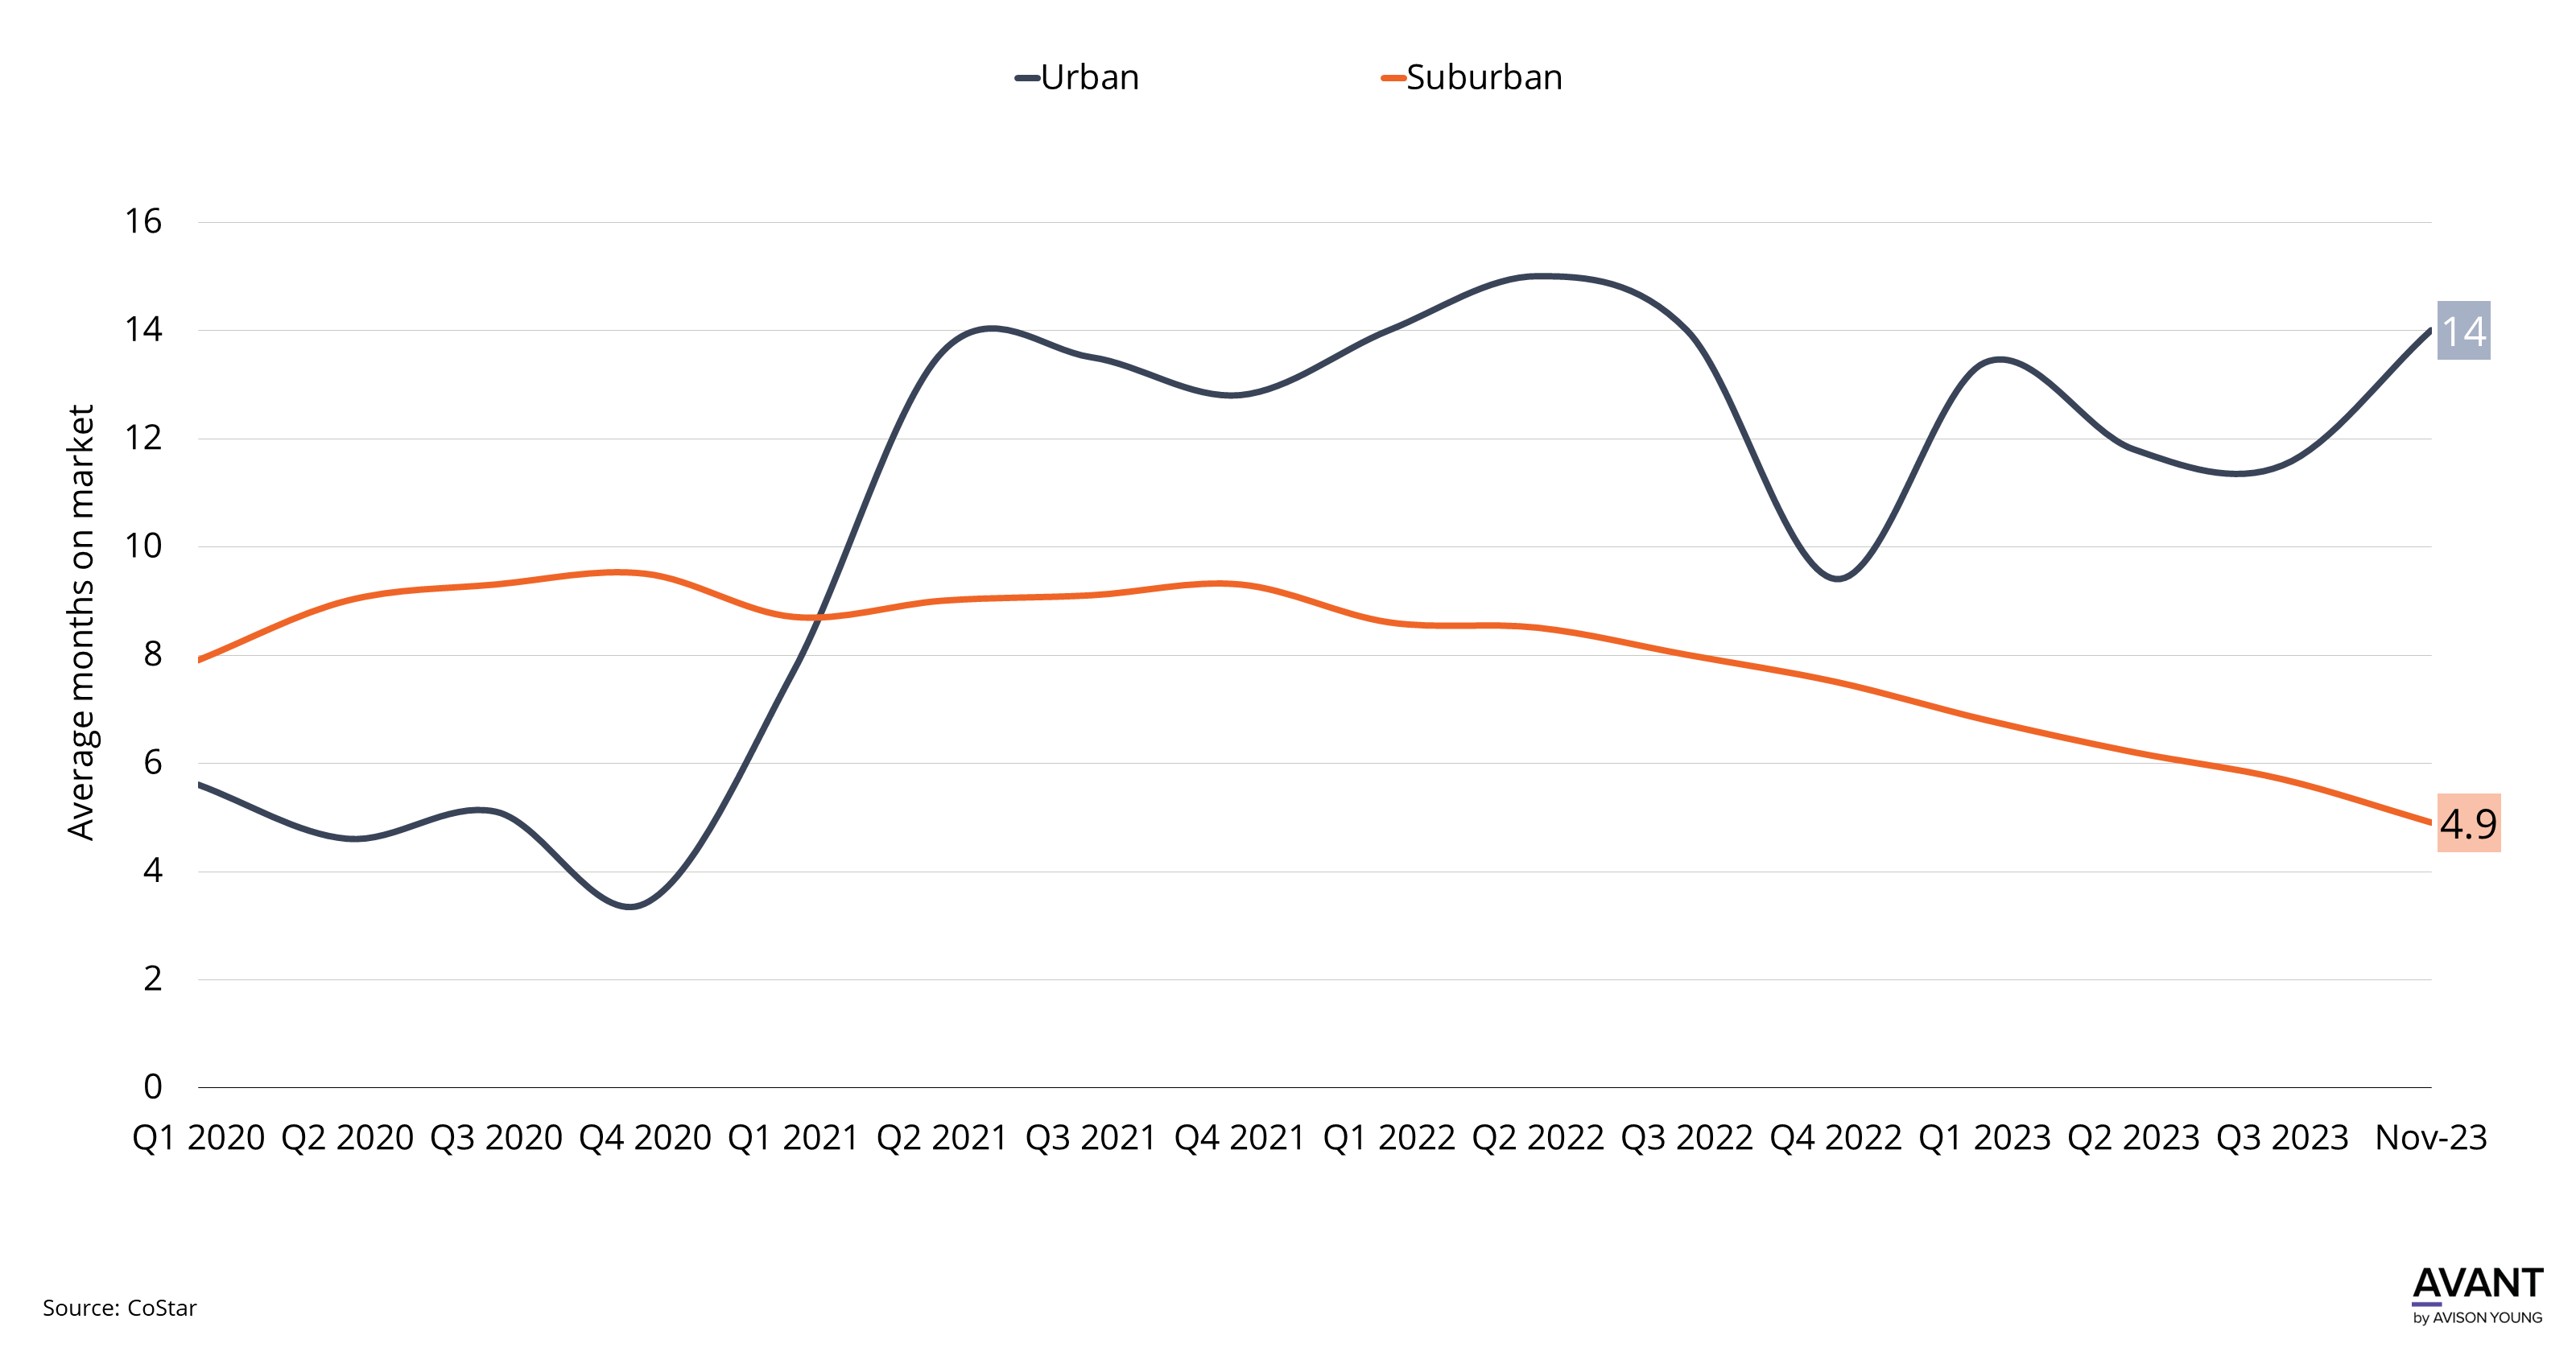 graph of West Palm Beach urban and suburban office submarkets average months on market from Q1 2020 to November 2023